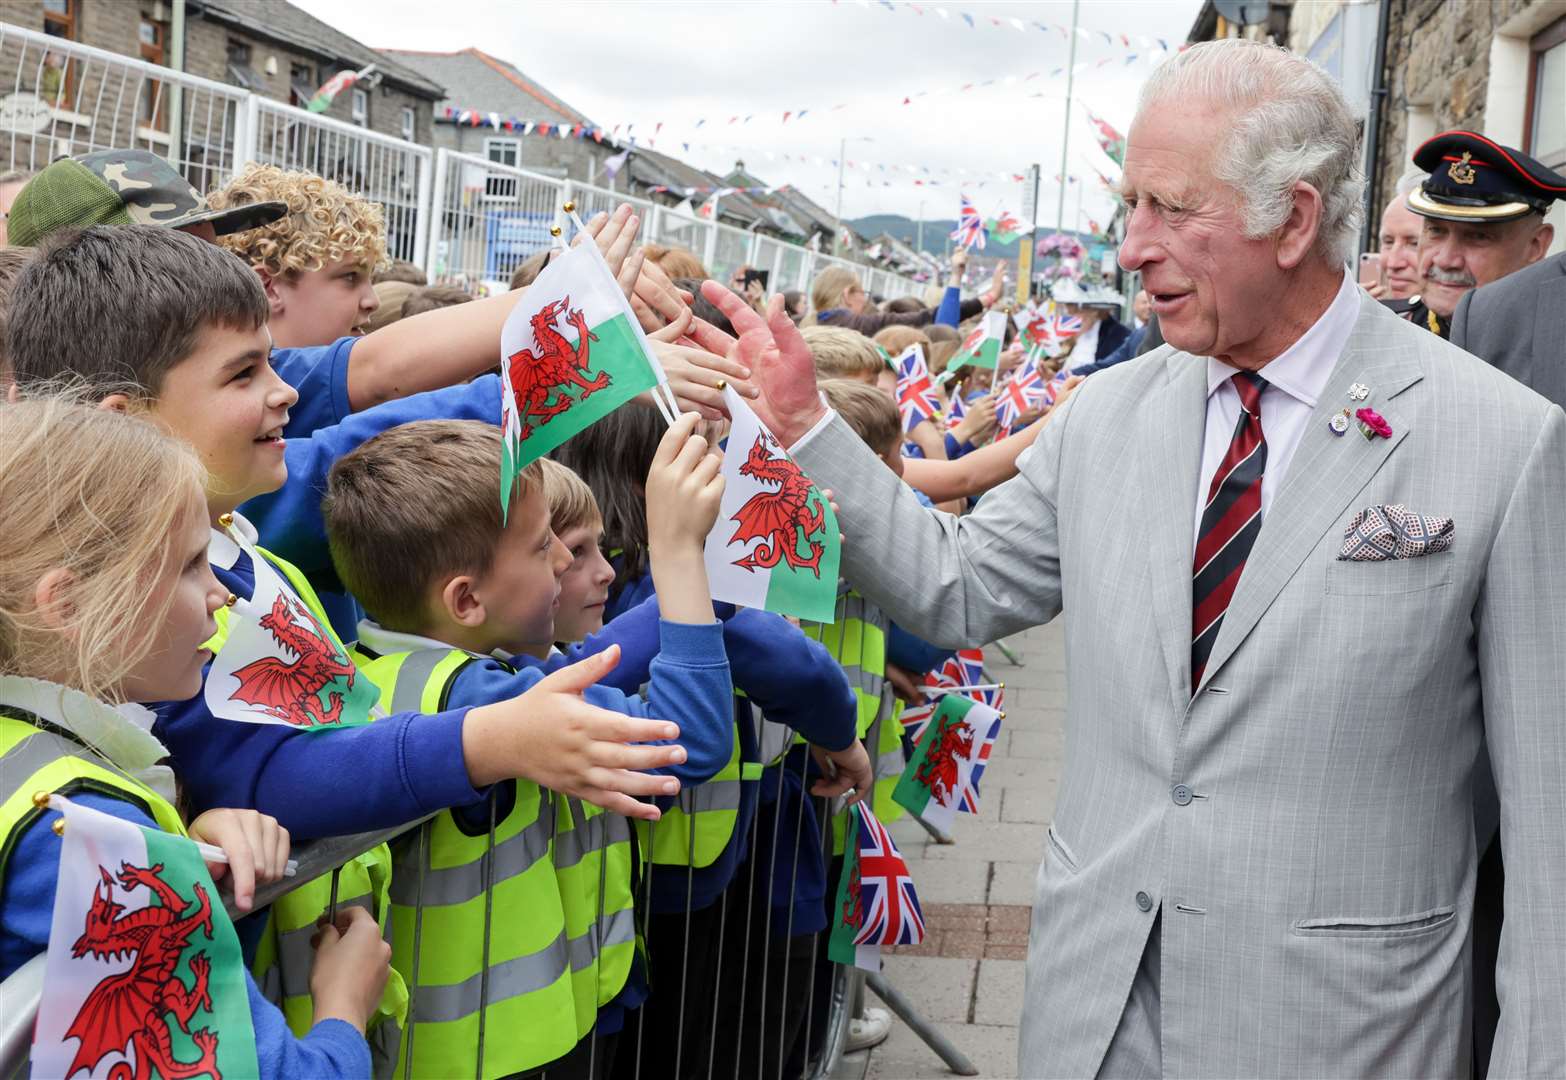 The Prince of Wales is greeted during a visit to Treorchy High Street (Chris Jackson/PA)